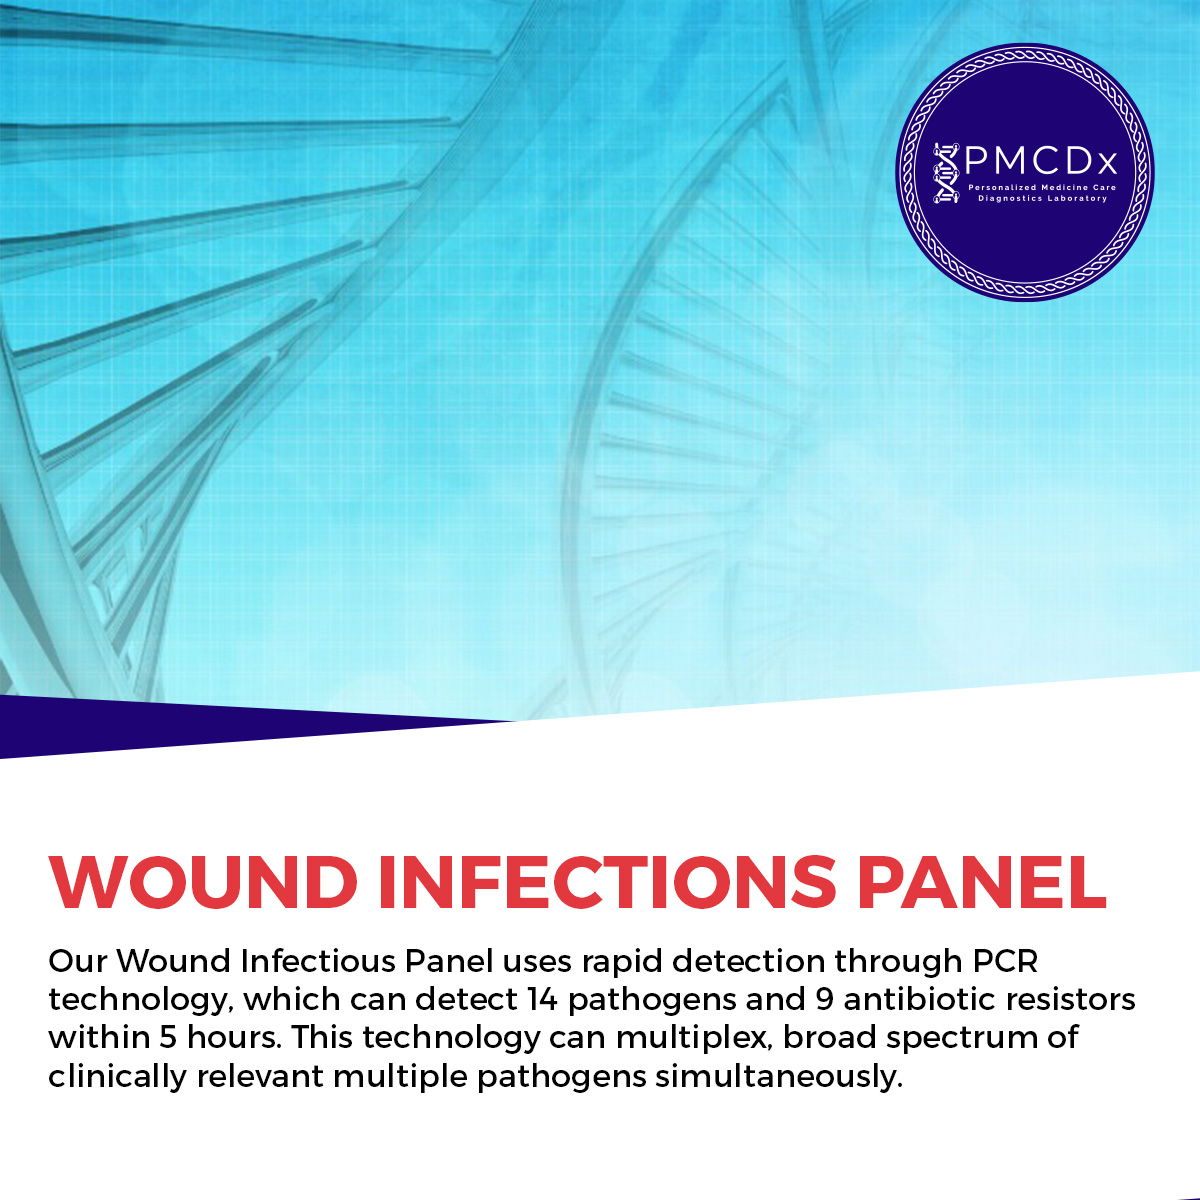 Our Wound Infections Panel uses rapid detection that can detect 14 pathogens and 9 antibiotic resistors within 5 hours.

#woundinfections #health #life #microorganisms #healthcare #infection